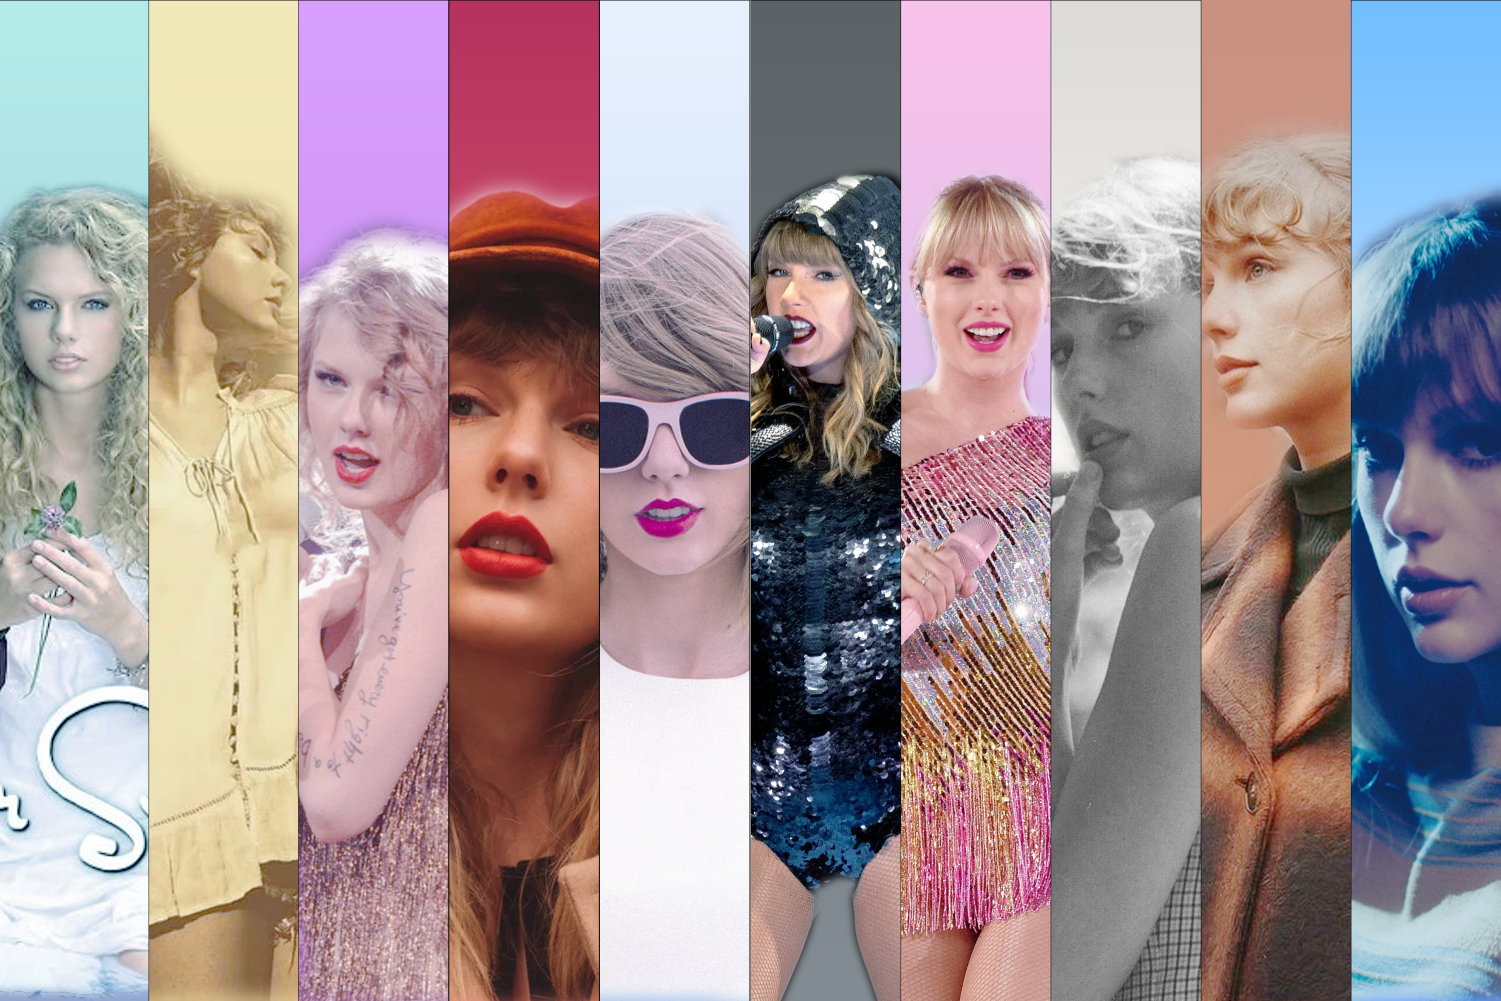 10 photos of Taylor Swift in a rainbow of outfits and colors to represent her different “eras”